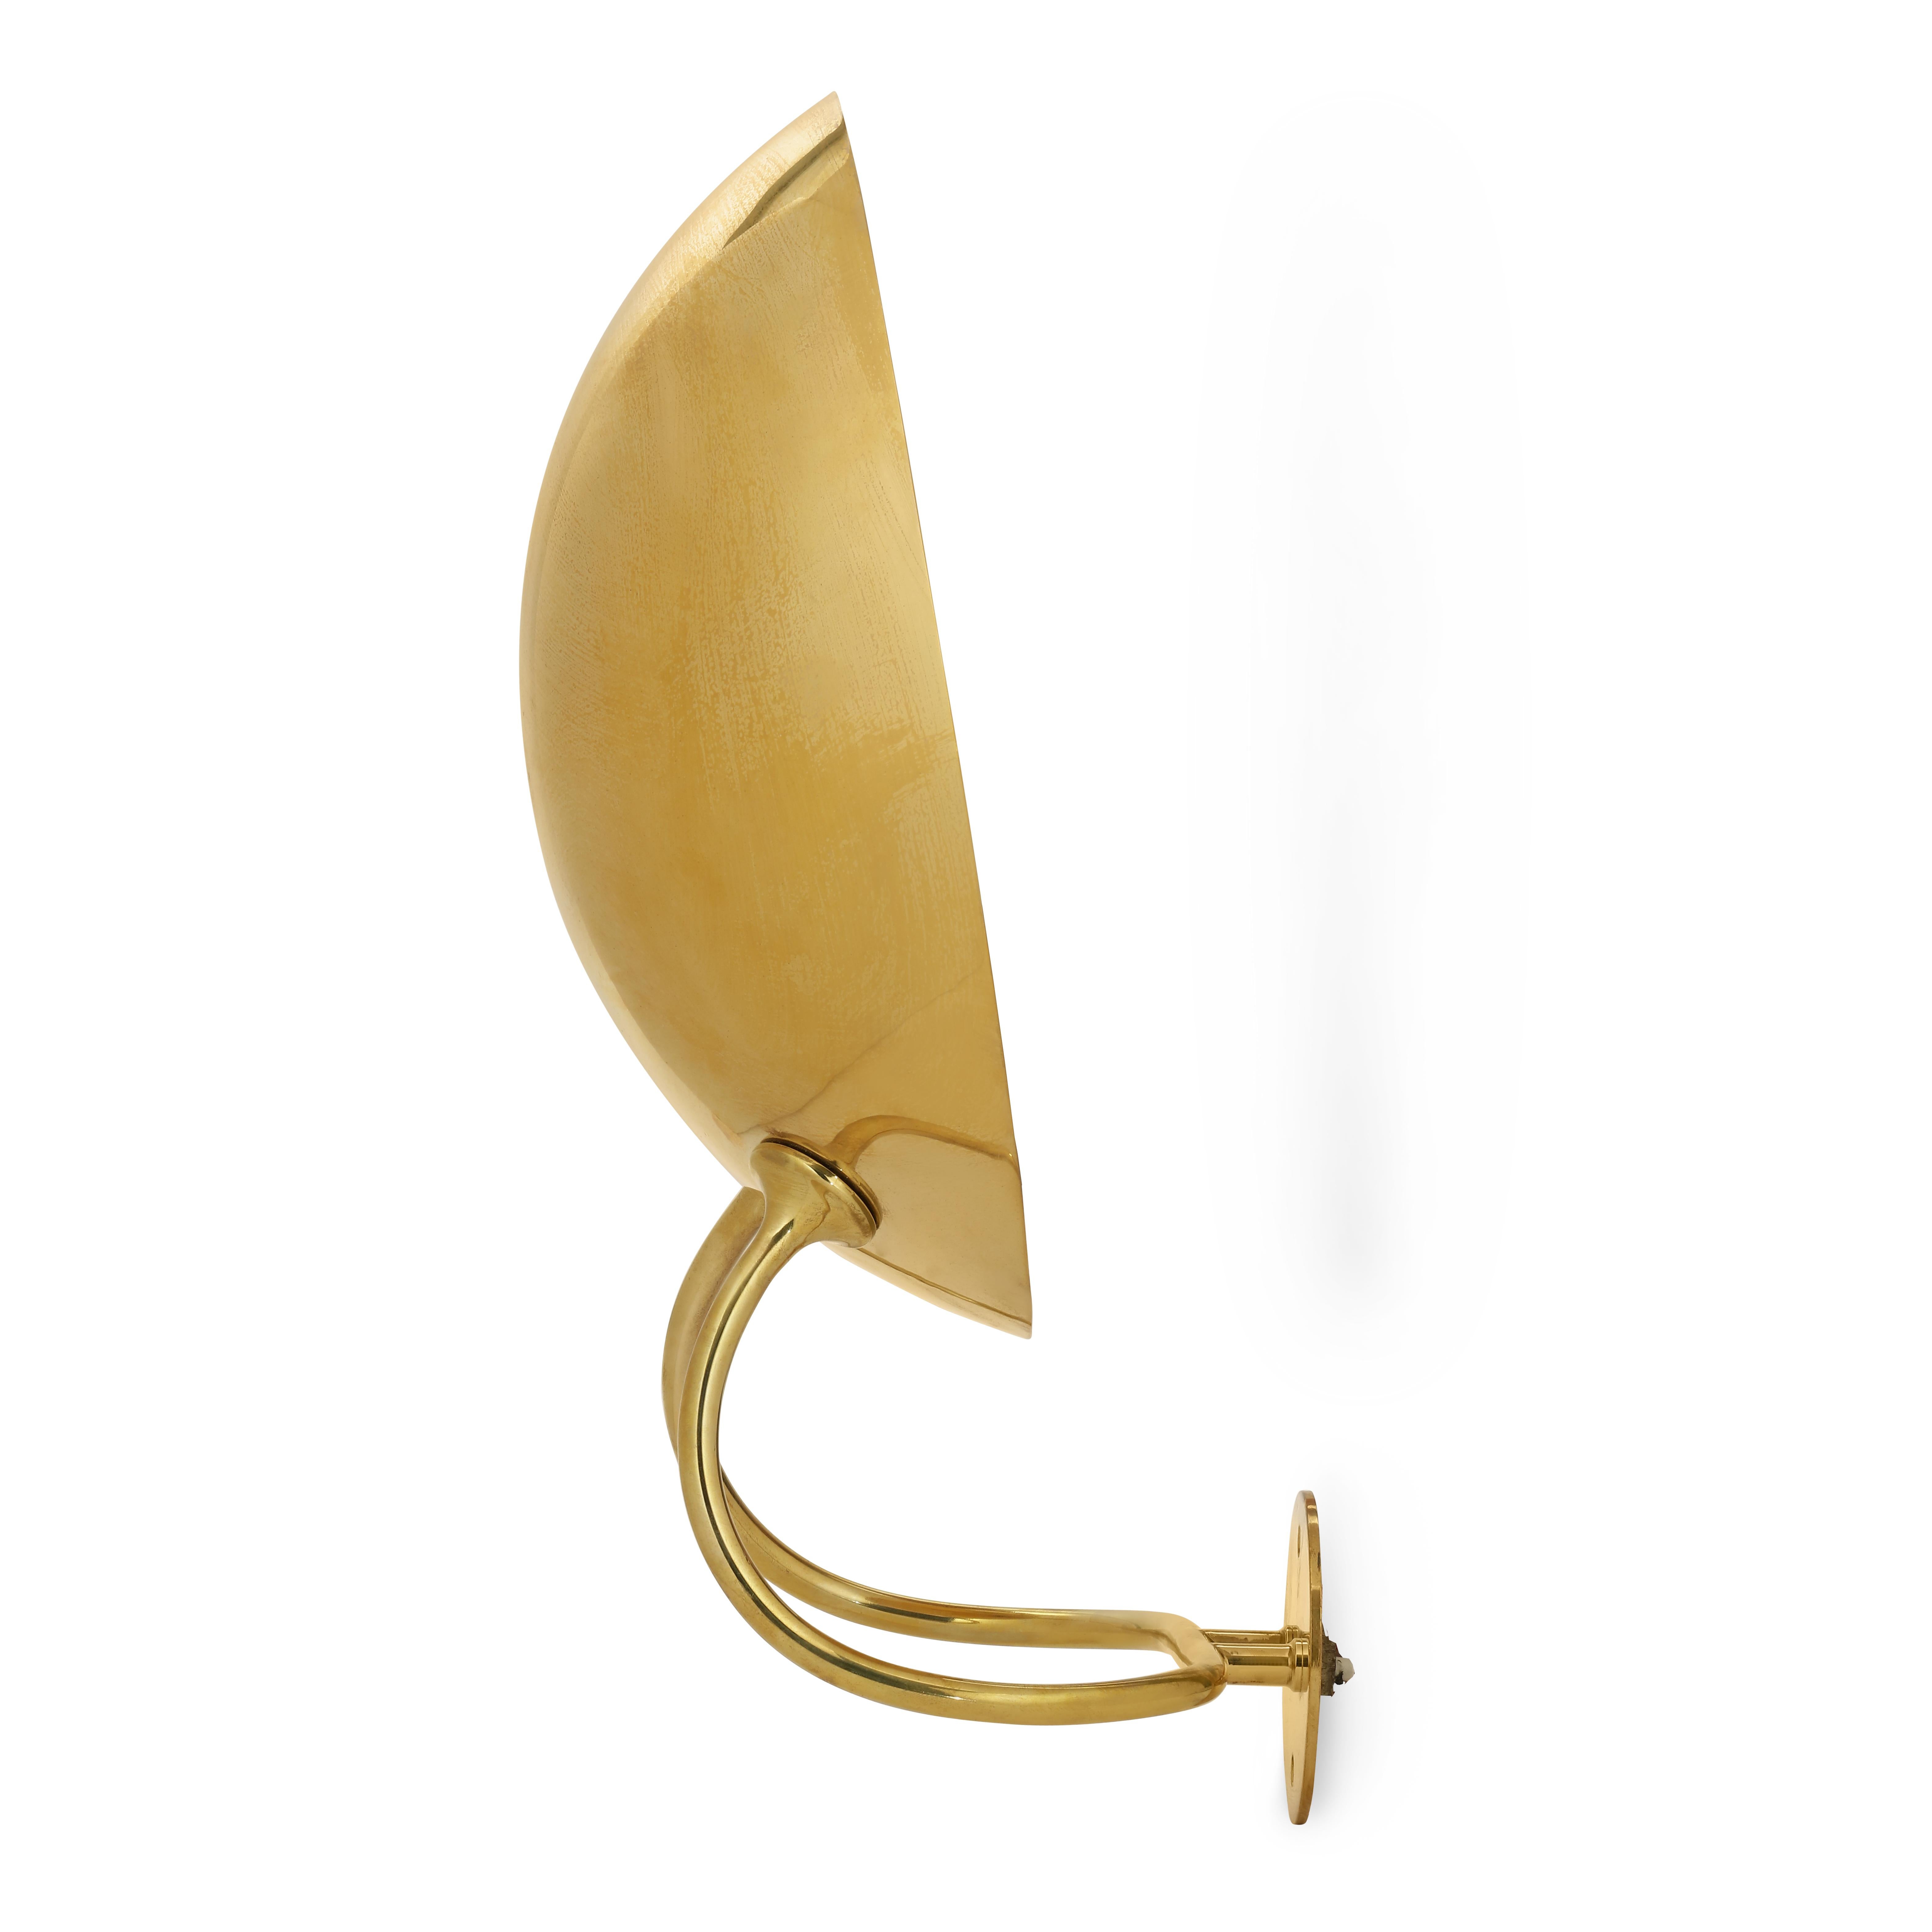 Arne Jacobsen and Louis Poulsen, Scandinavian Modern

Early rare lamp designed by Arne Jacobsen and manufactured by Louis Poulsen for Gentofte Stadium and KFUM 1936-1943. 

The wall lamp is made of brass and has two arms that hold the curved plate